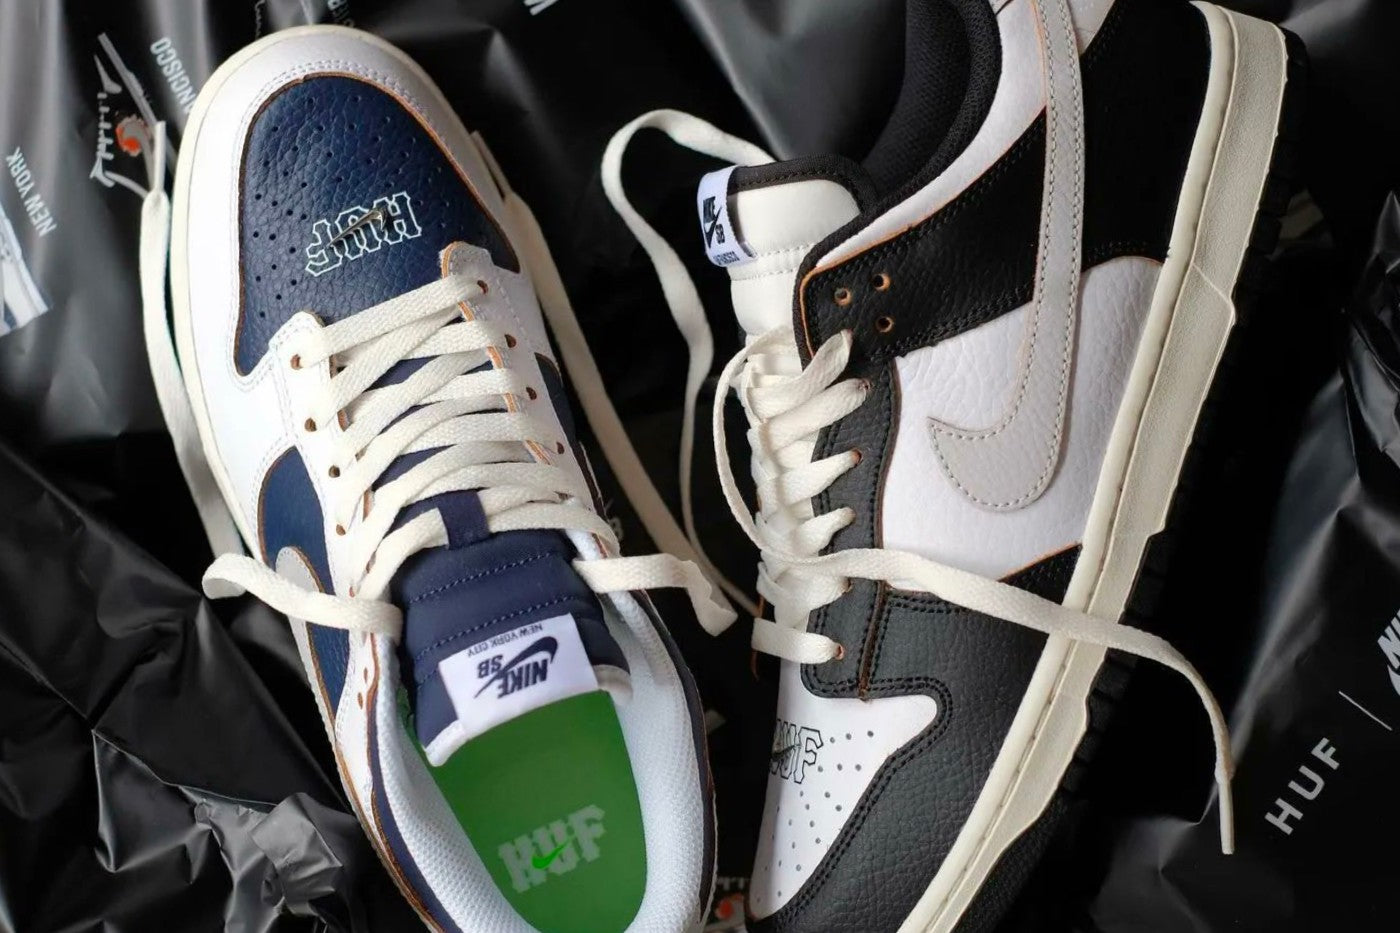 The HUF x Nike SB Dunk Low Collection is Available at The Edit LDN